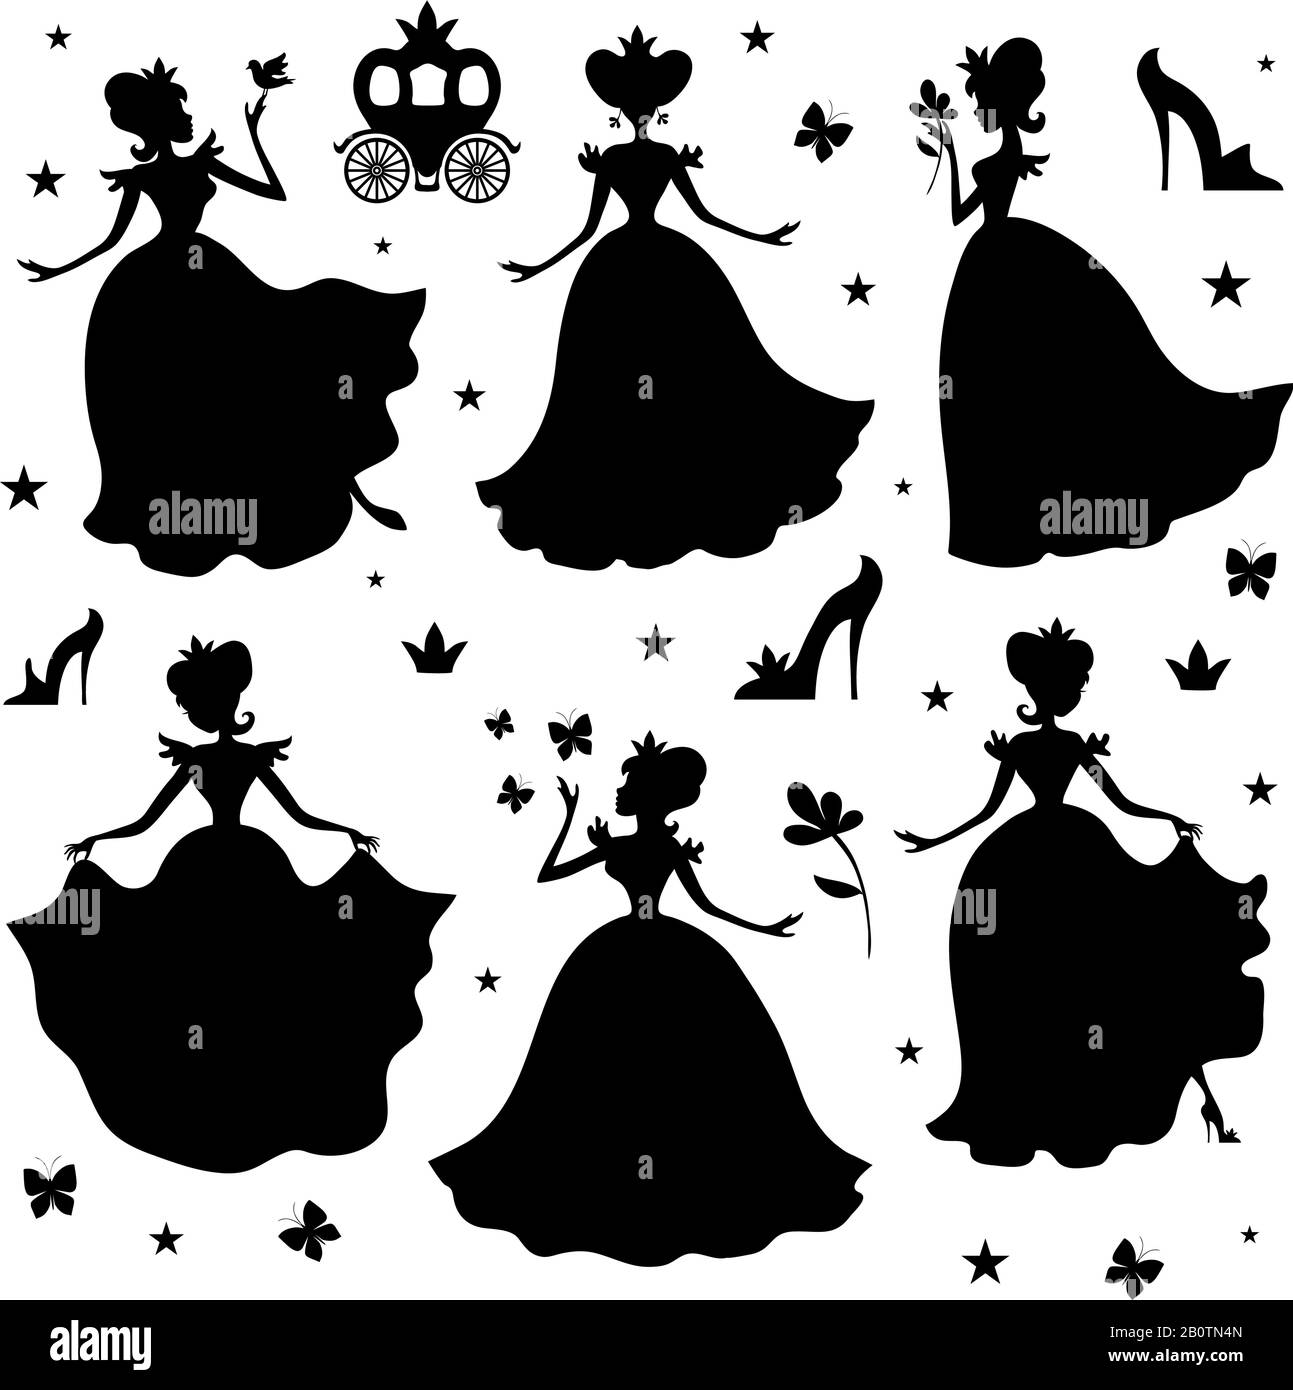 Little princess vector silhouettes. Girl princess black silhouette illustration isolated on white background Stock Vector